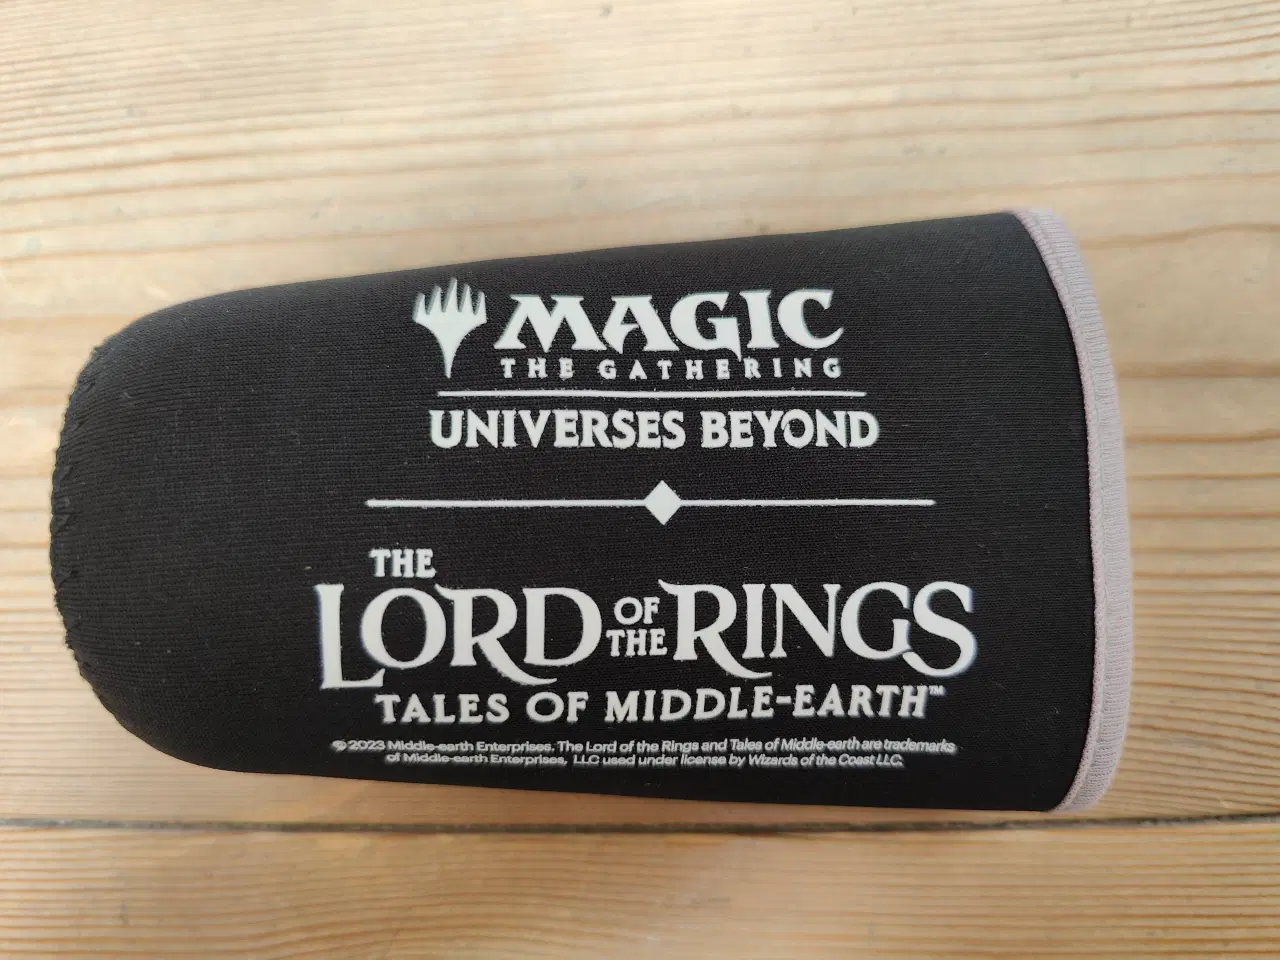 Billede 2 - Bottle Magic The Gathering The Lord of the Rings